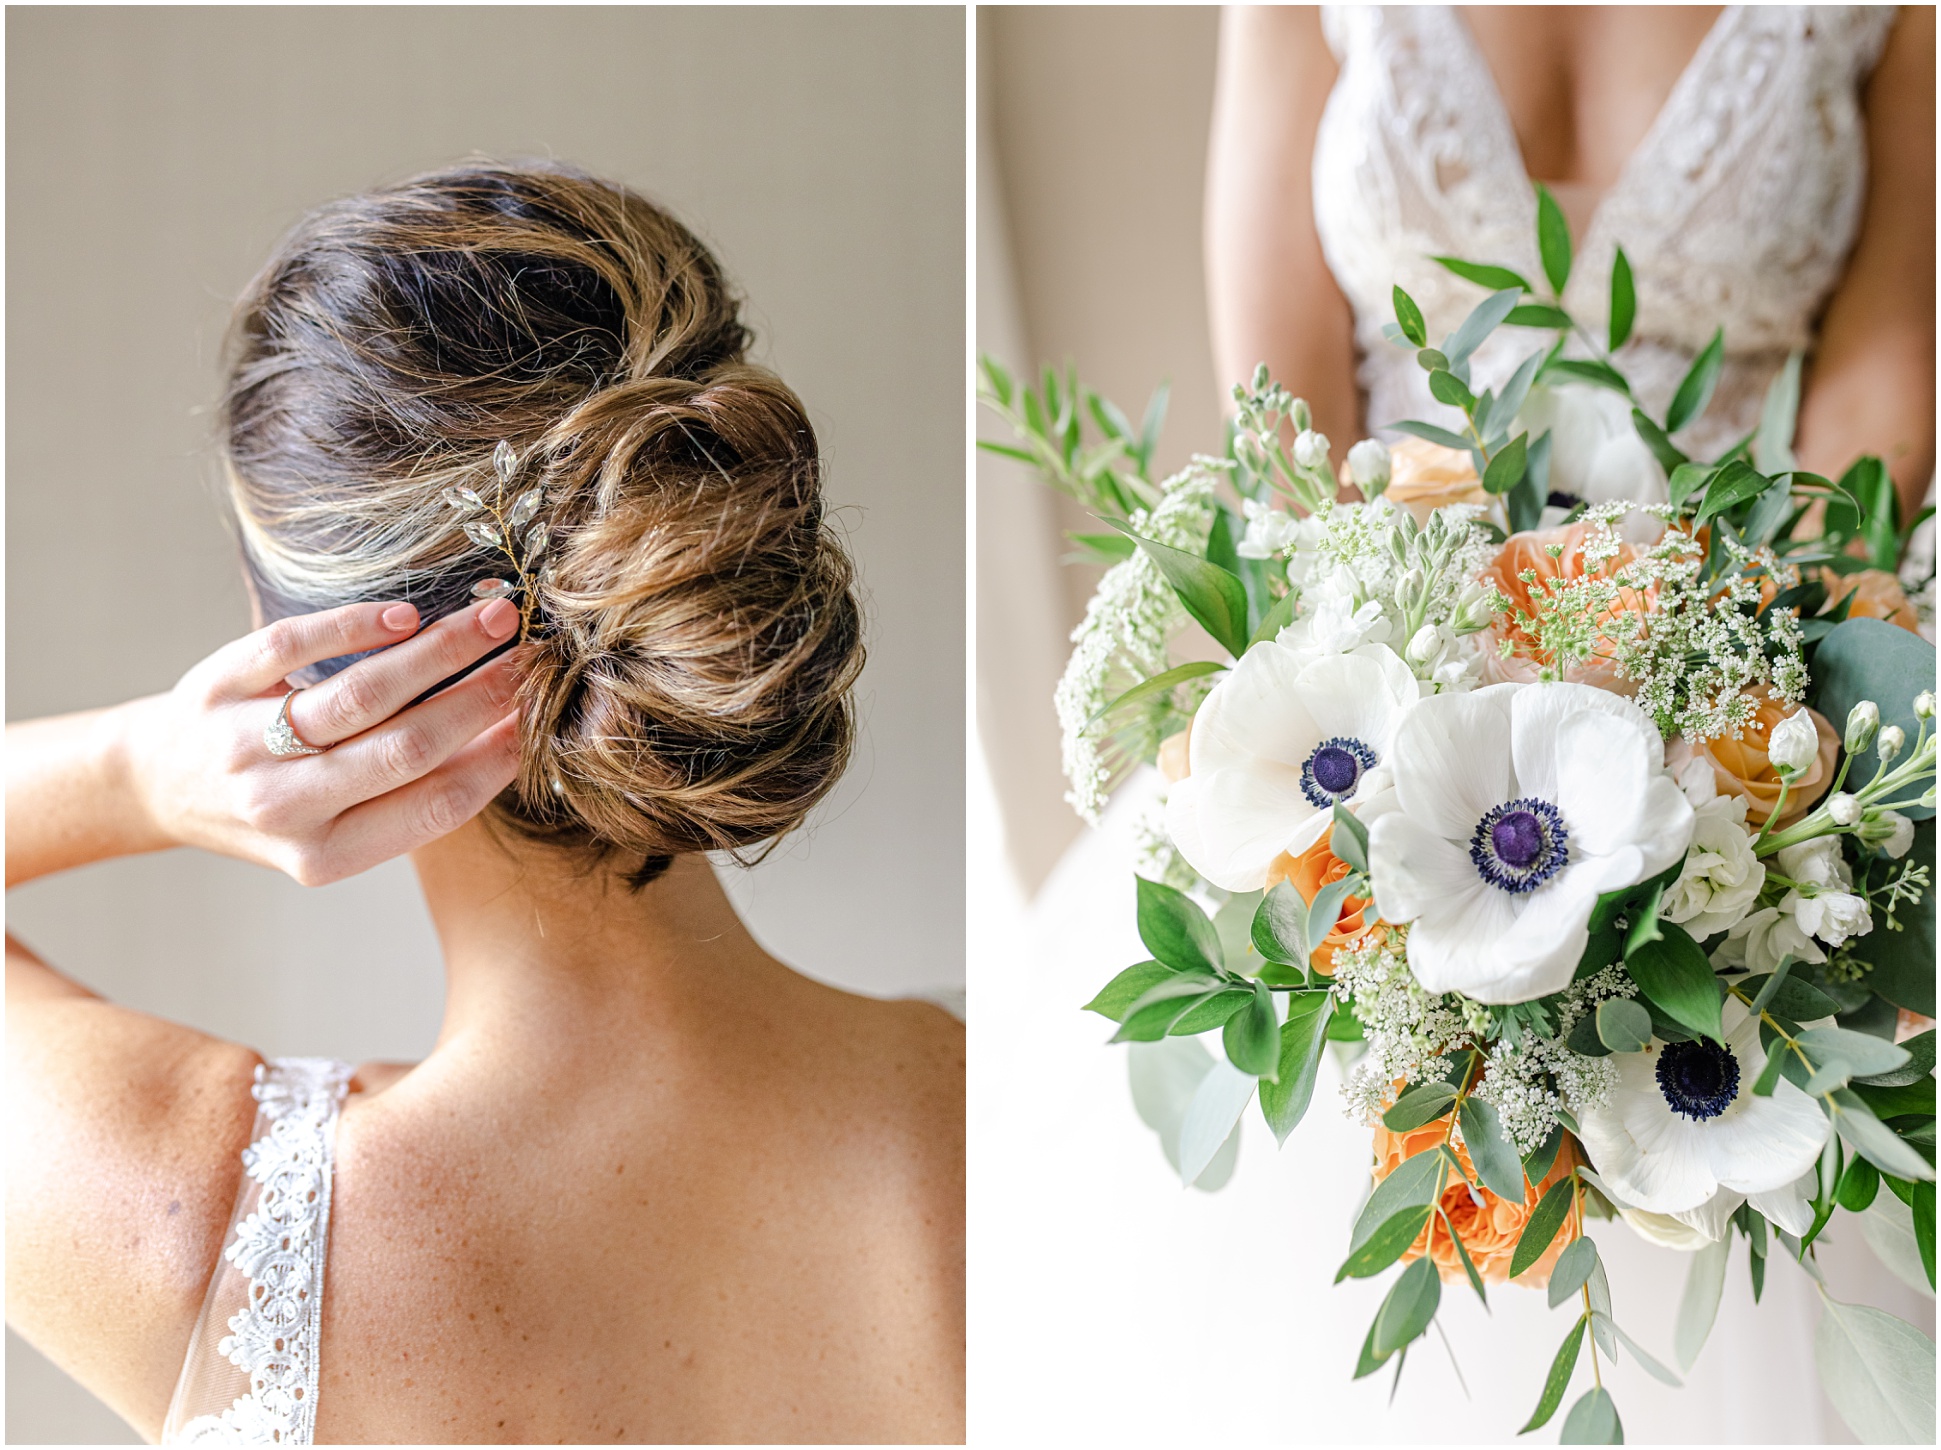 Left: bride putting in hair piece, Right: Bride holding bouquet